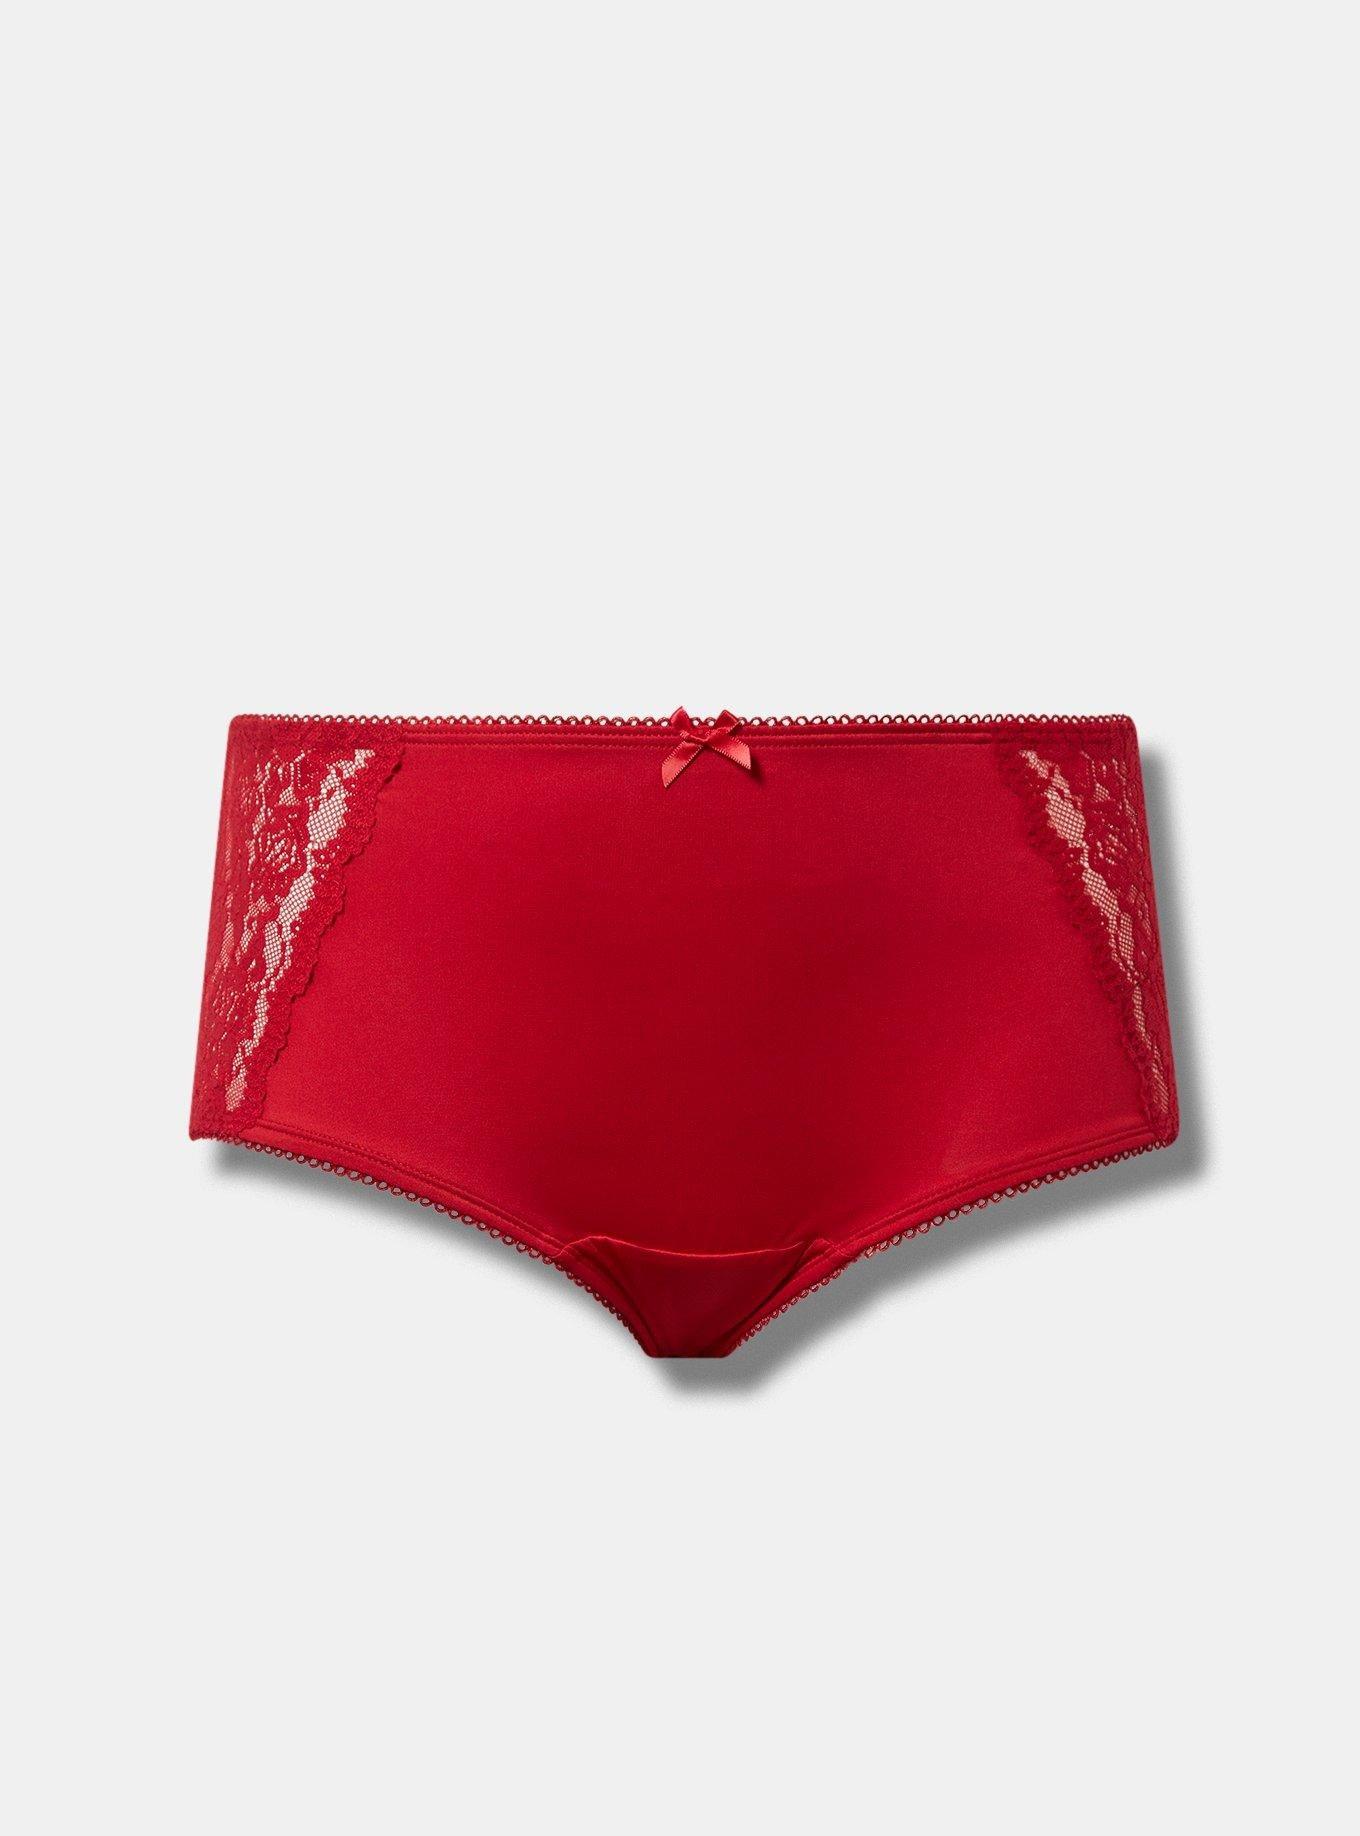 Buy Shimmer Lace-Waist Cotton Cheeky Panty Online